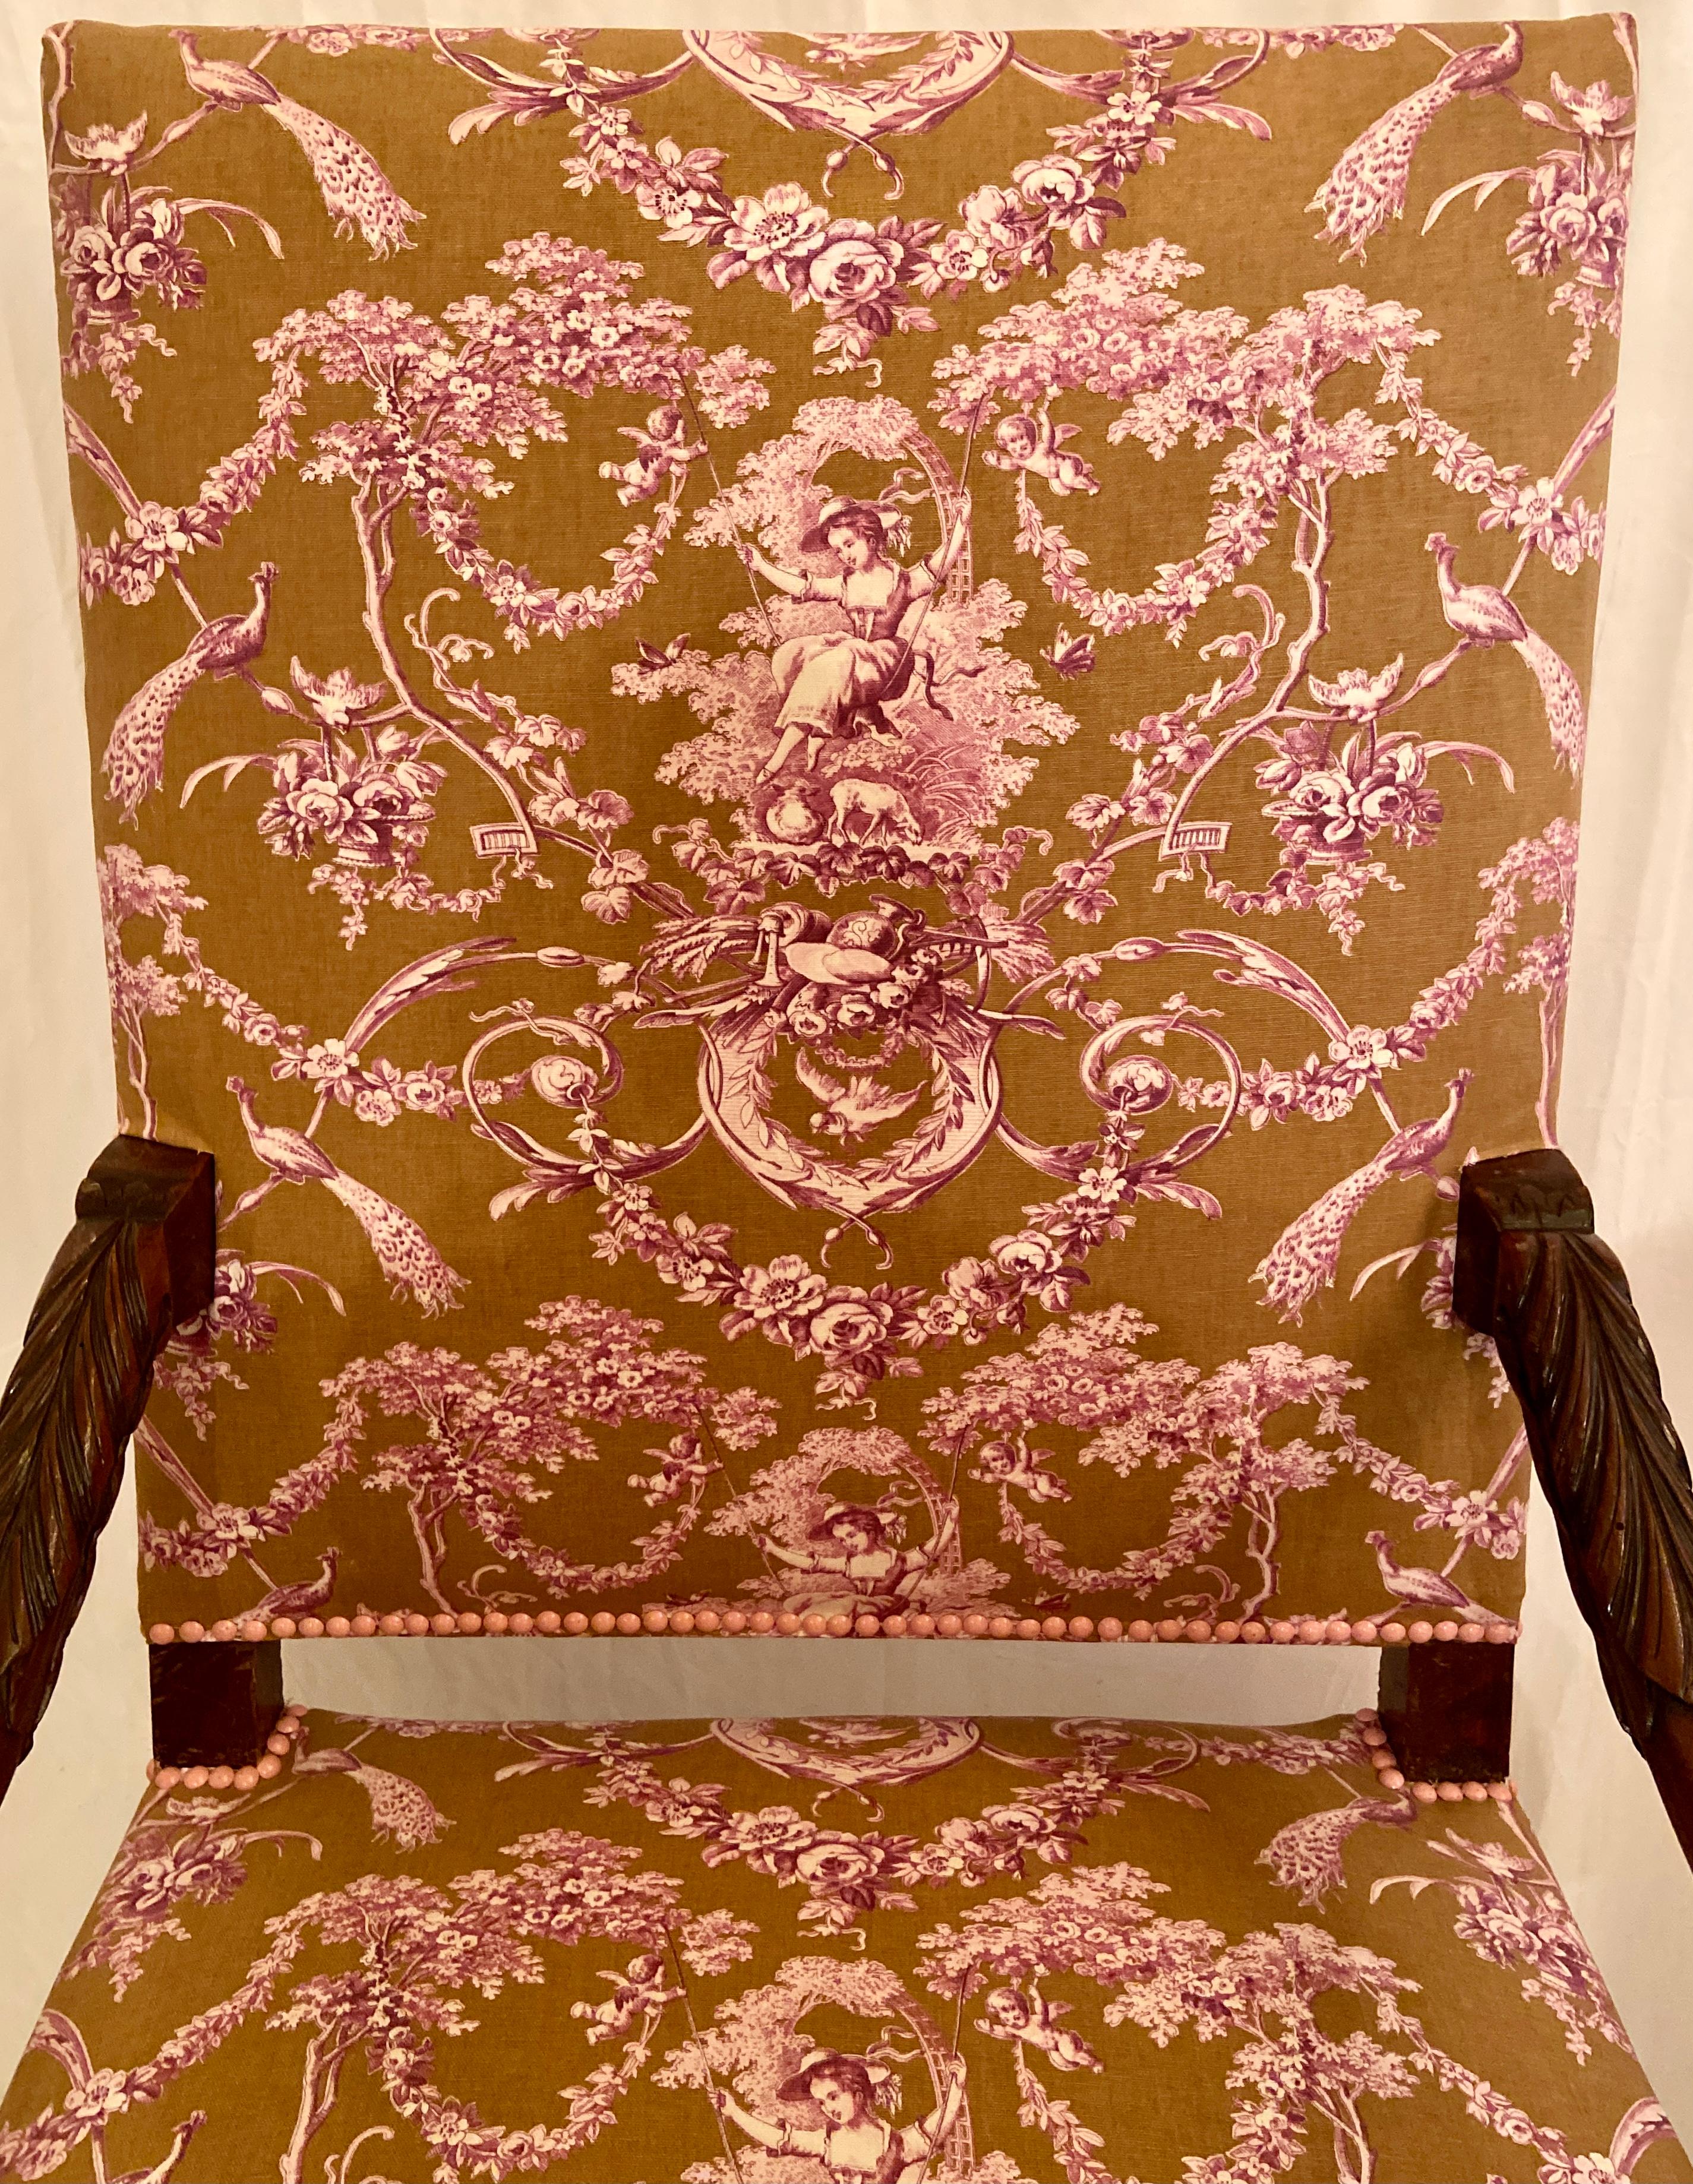 Pair Antique French Francois i Carved Walnut & Toile Armchairs, circa 1860 In Good Condition For Sale In New Orleans, LA